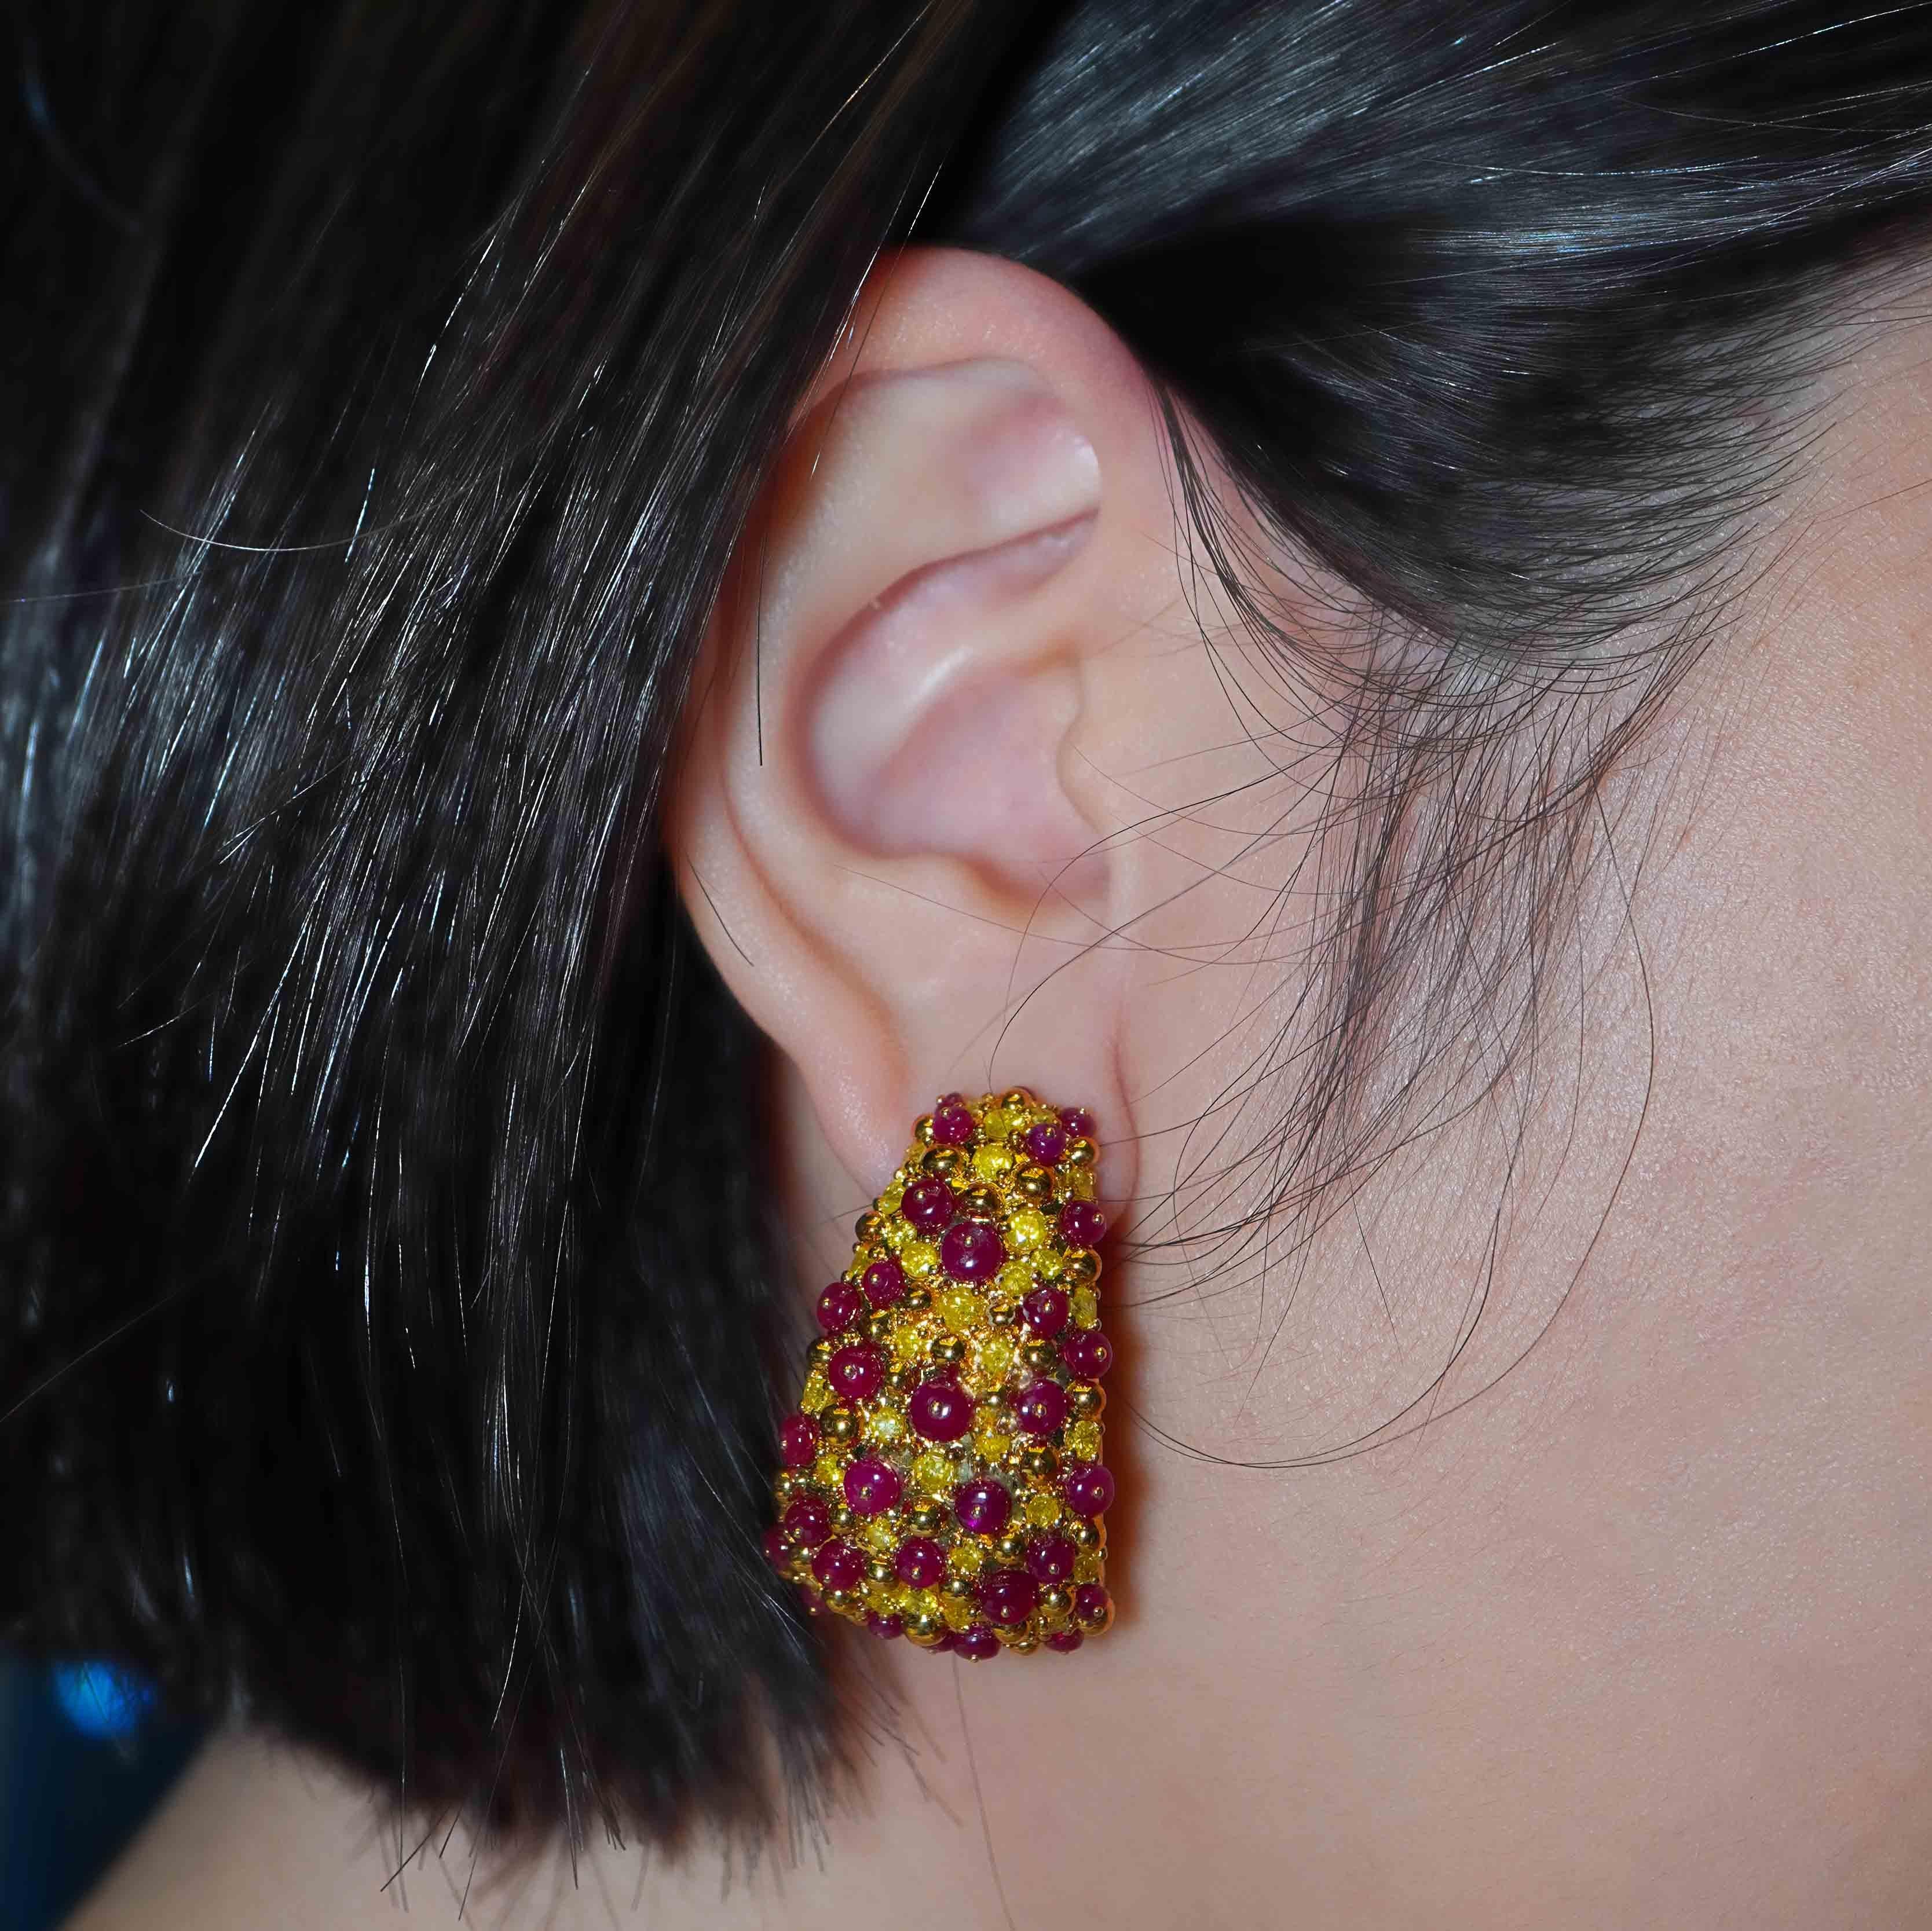 Round Cut 11.12 Carat Vivid Red Ruby with 3.81 Carat Fancy Vivid Yellow Designer Earring For Sale